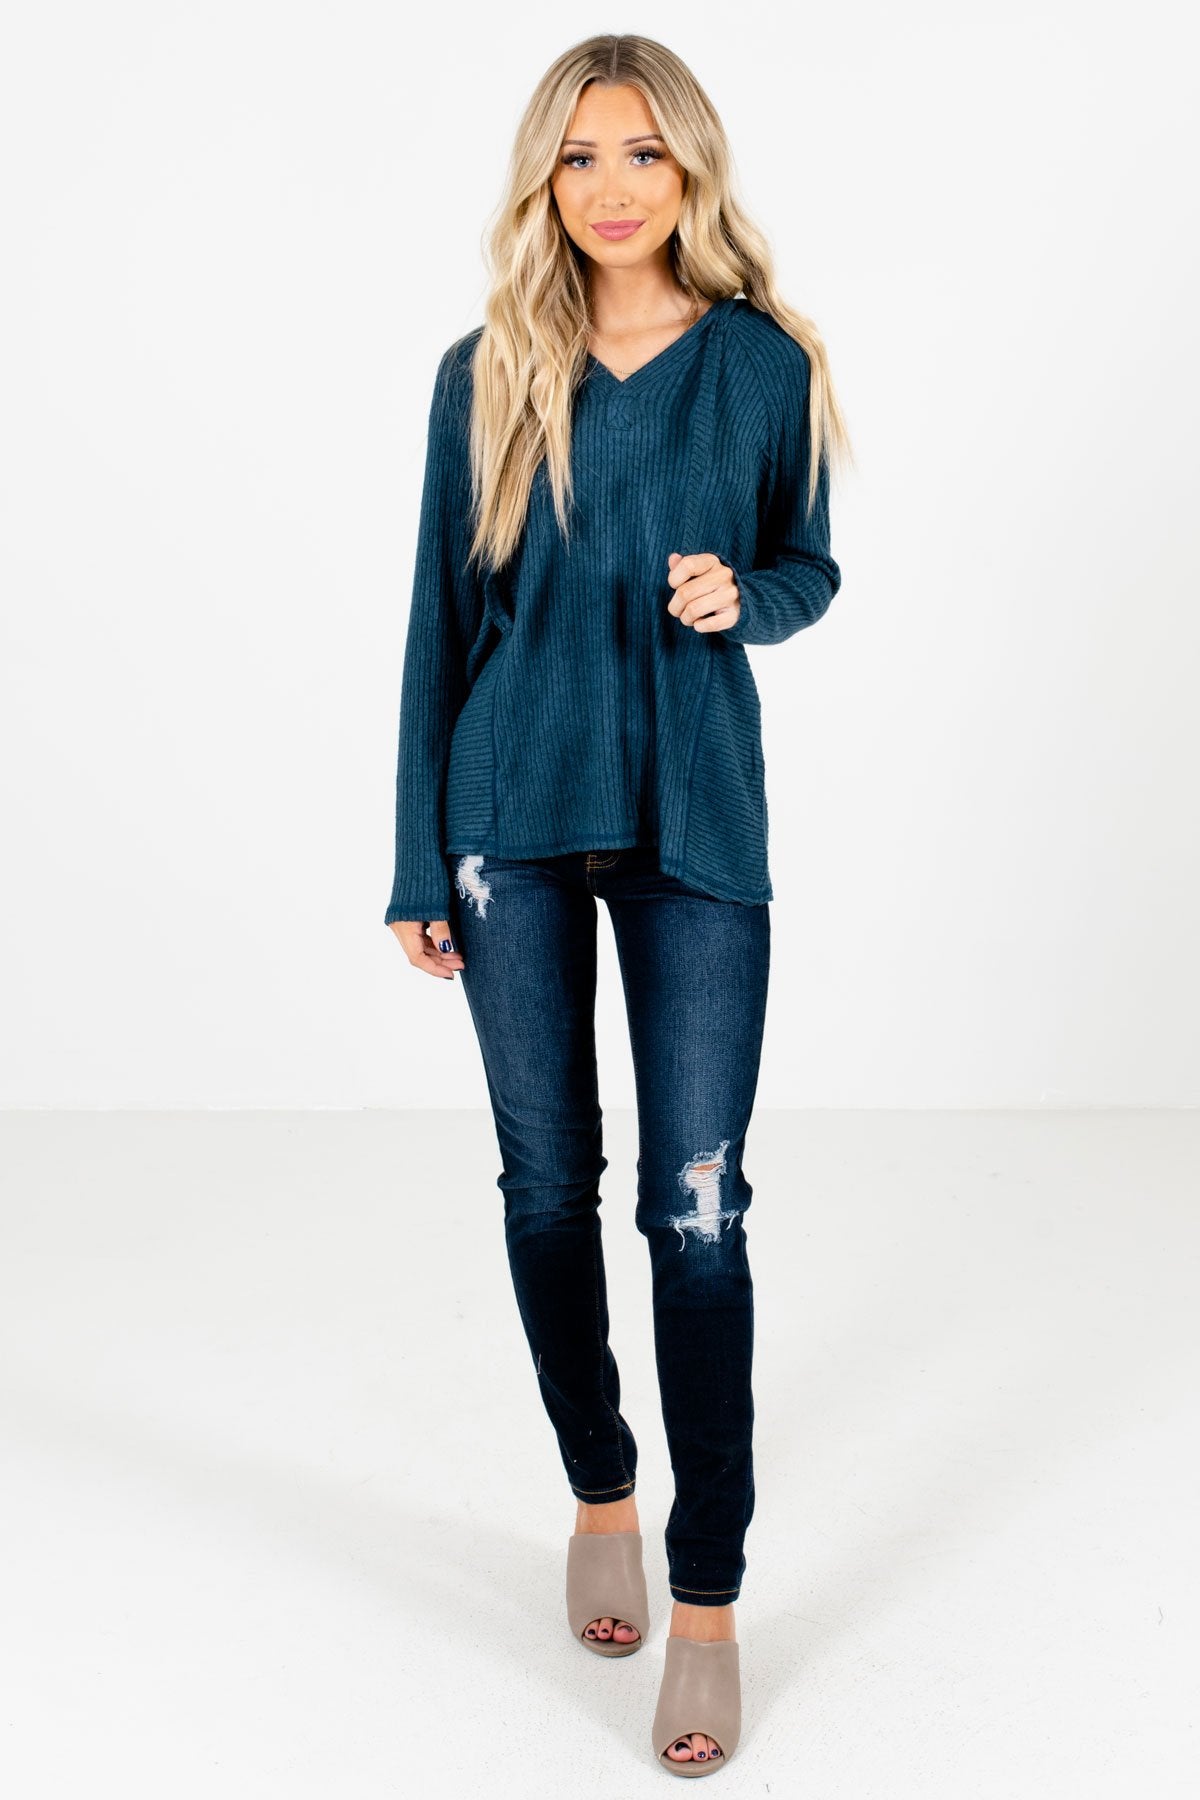 Women’s Blue Fall and Winter Boutique Clothing